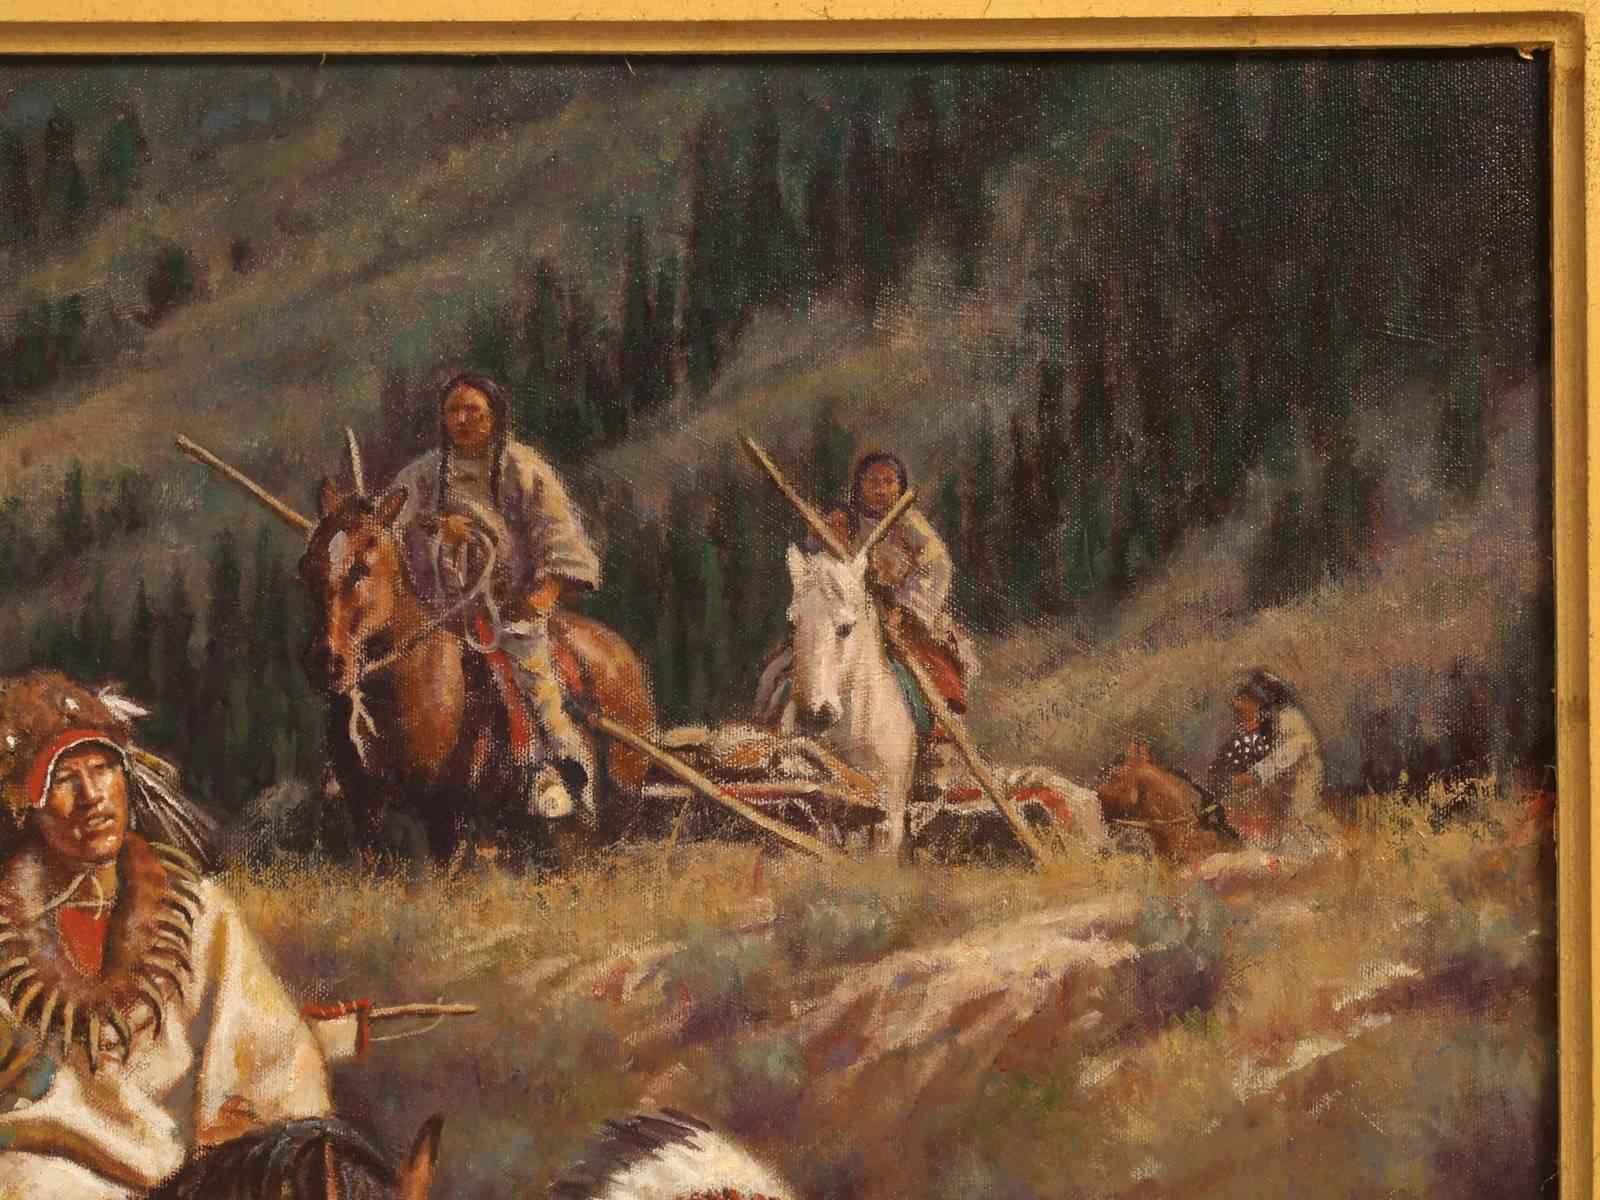 Don Oelze's family was from the Southwest, but their faith took them to different areas of the world. Don, born in New Zealand at an early age had a fascination with America, especially cowboys and Indians.
Don started drawing Indians at a very